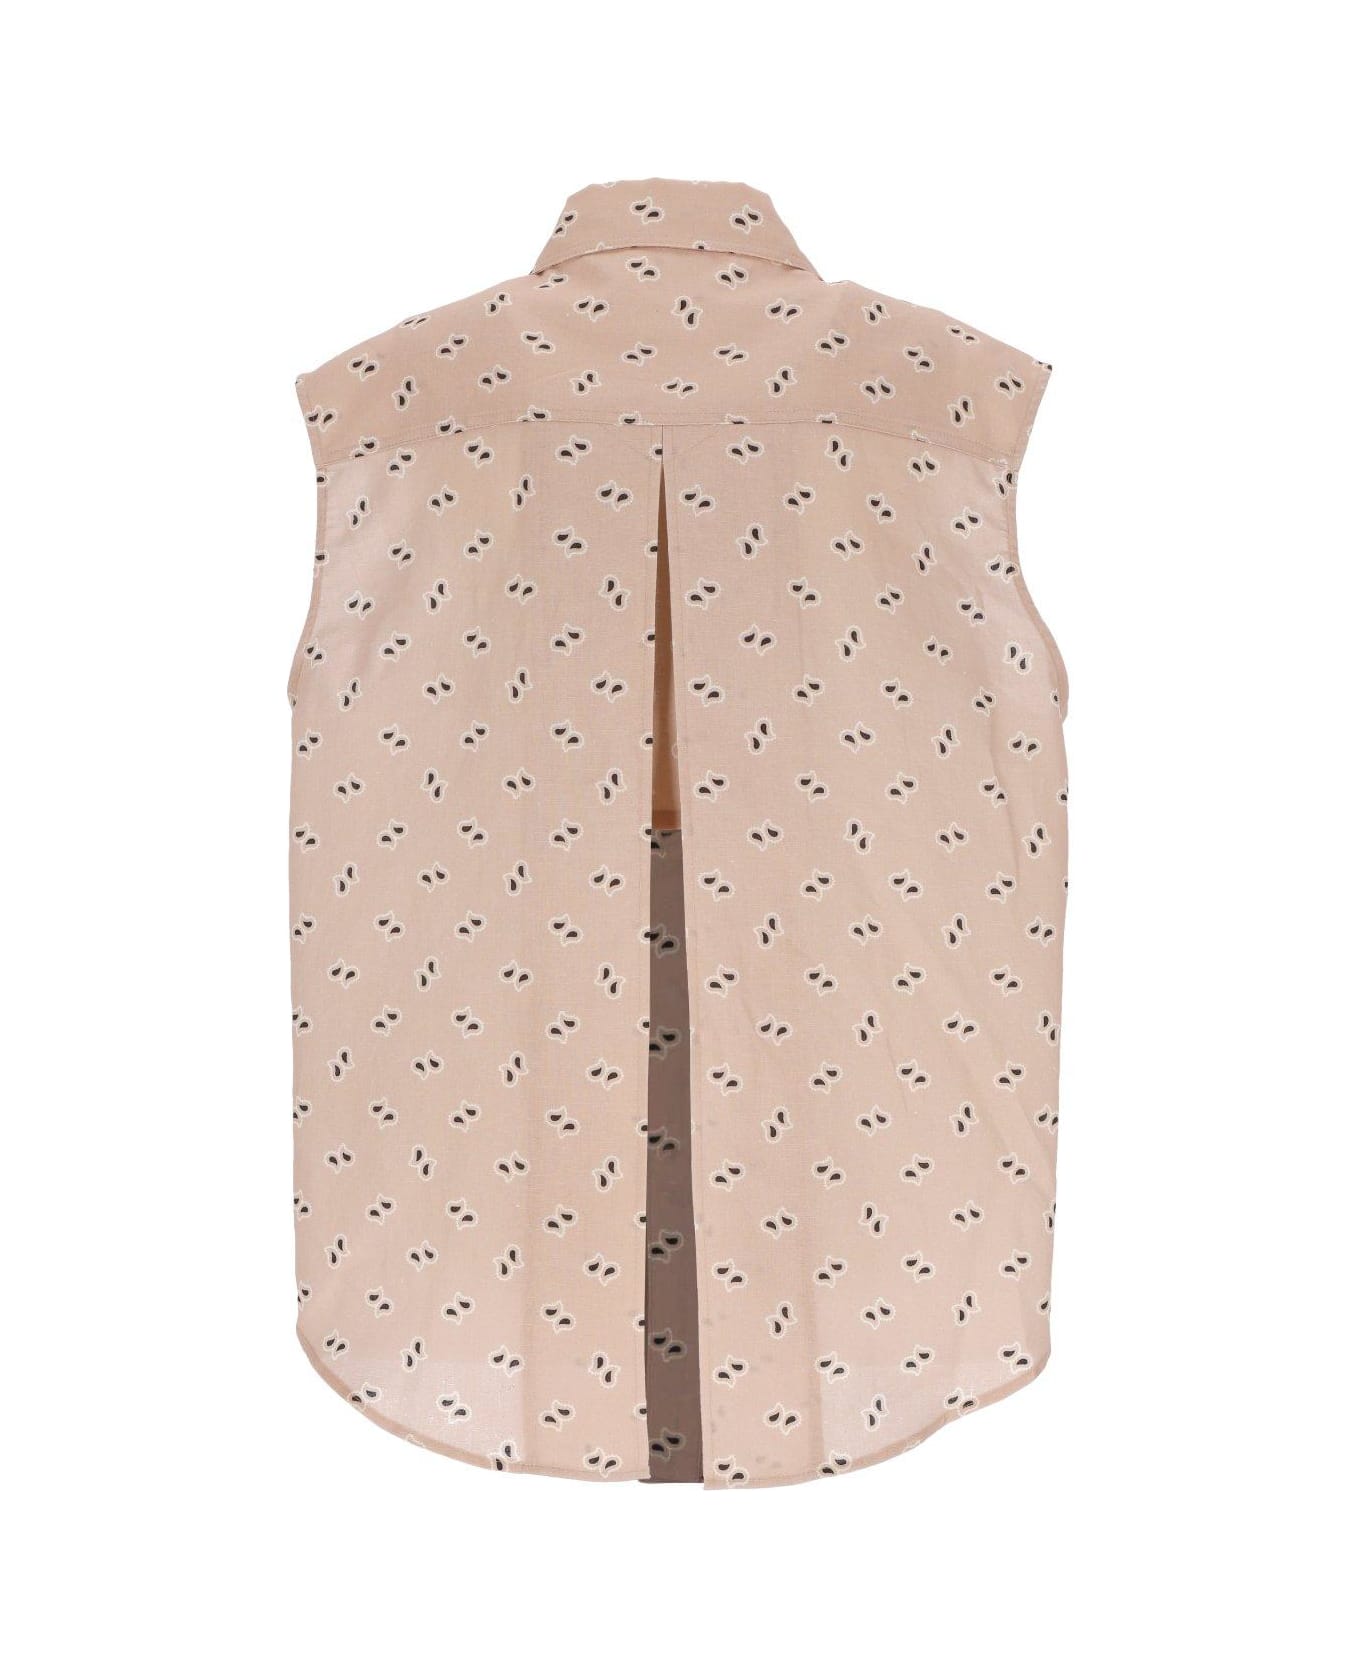 Palm Angels All-over Patterned Sleeveless Top - pink